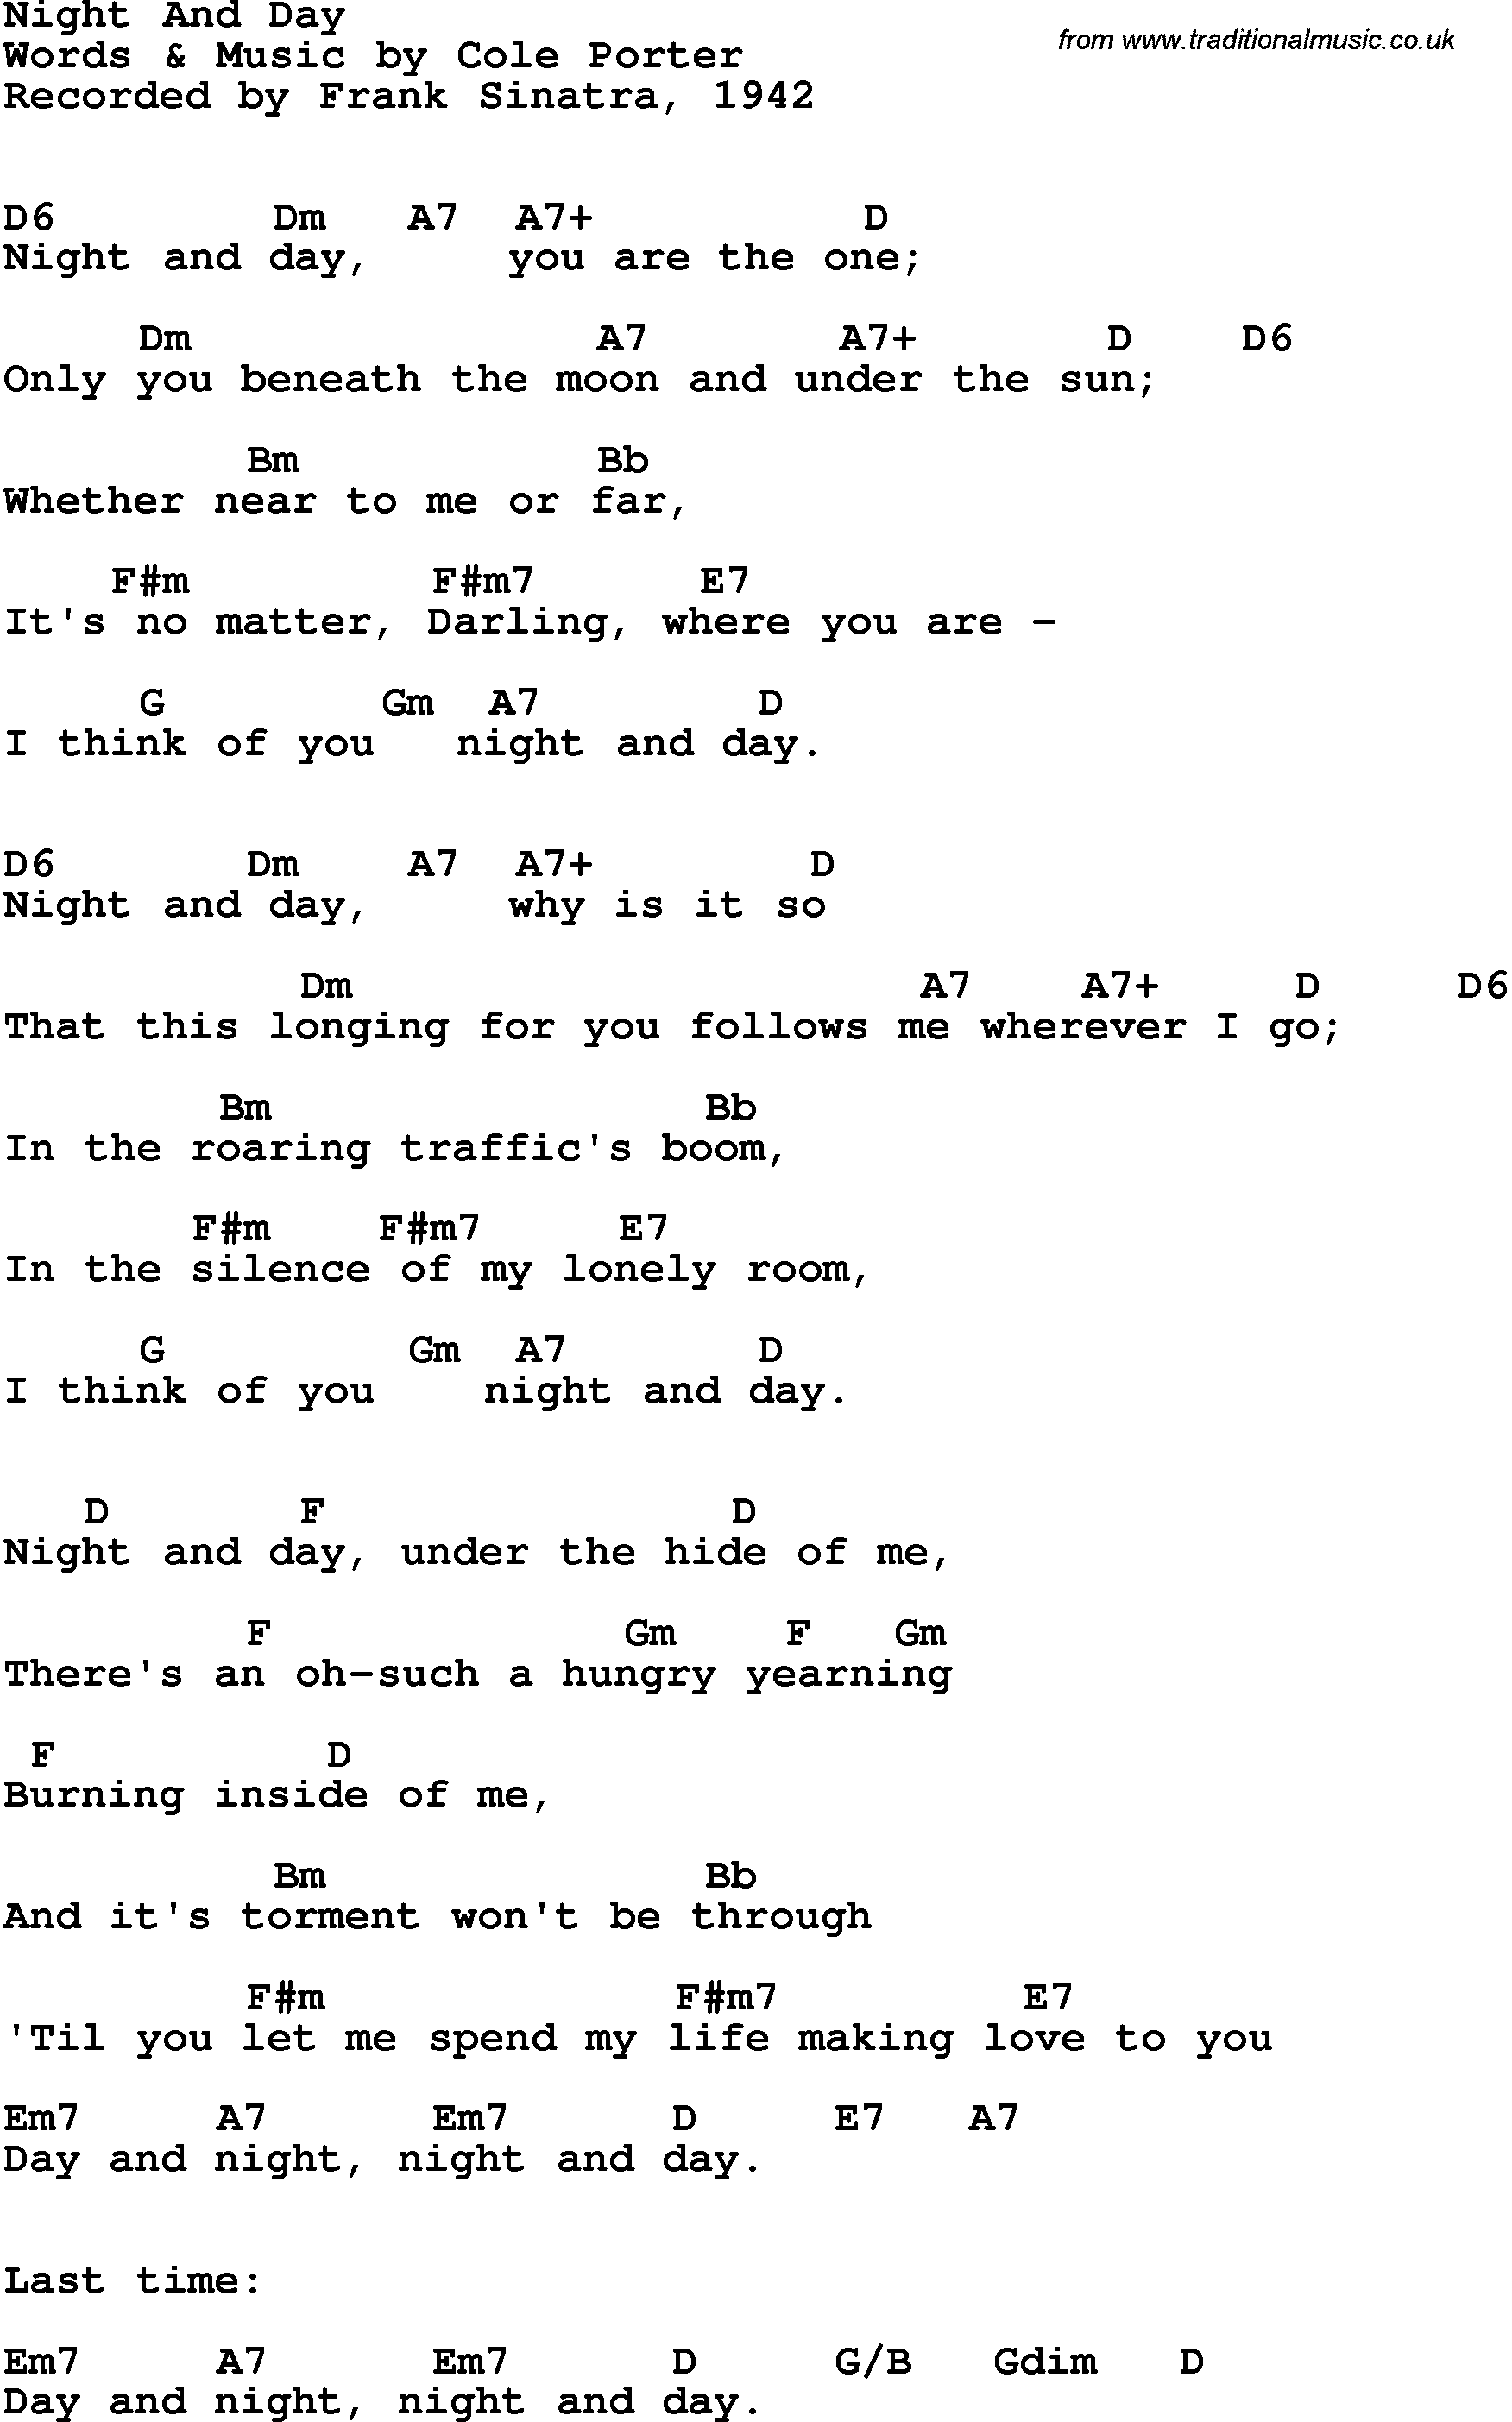 Song Lyrics with guitar chords for Night And Day - Ella Fitzgerald, 1953